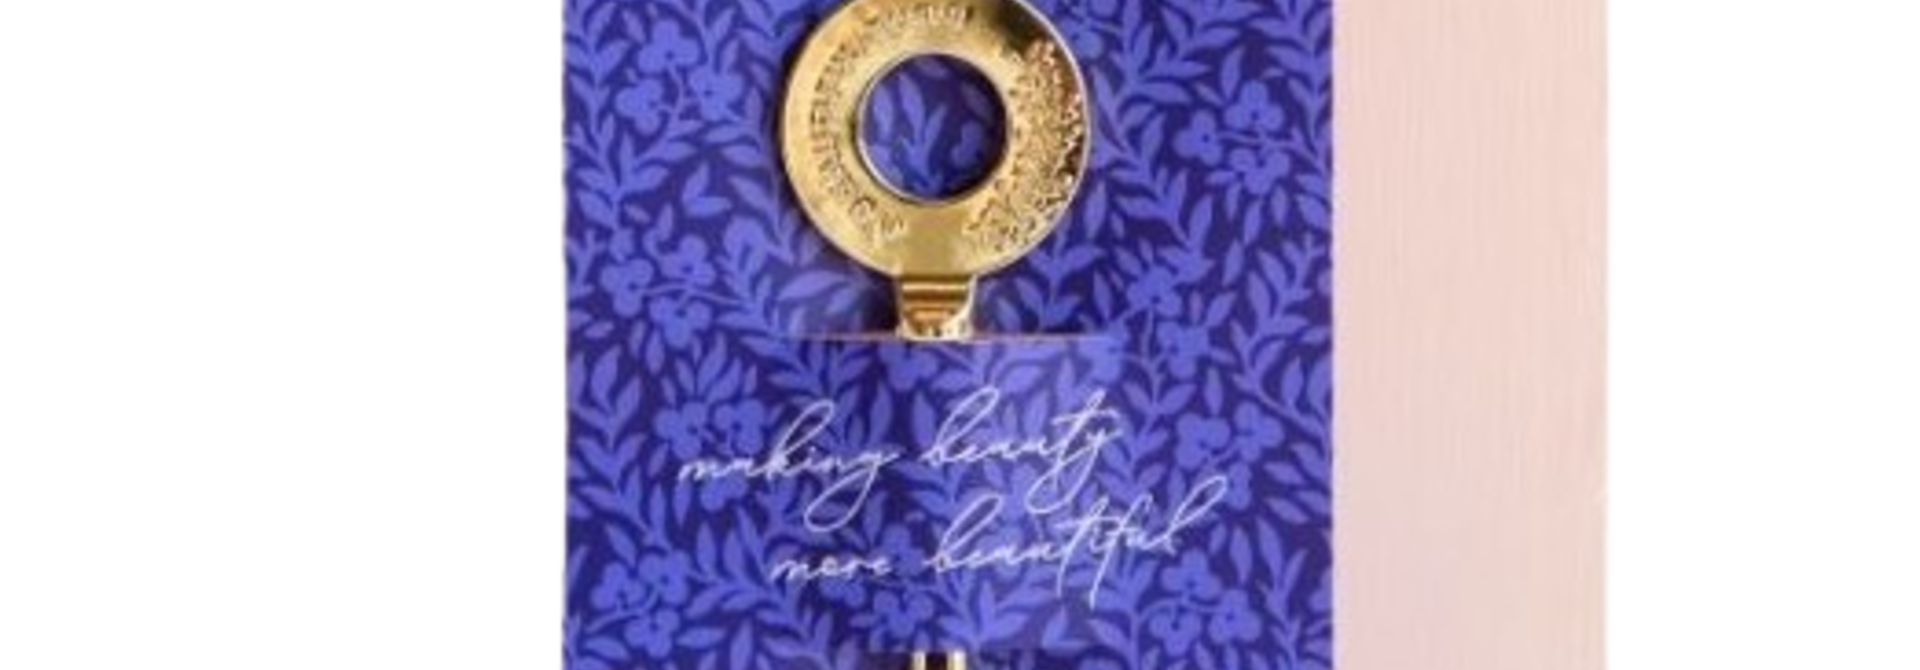 Gold Key | The Archive Collection, Hand Cream Accessory-1.4 Inch x 4.5 Inch